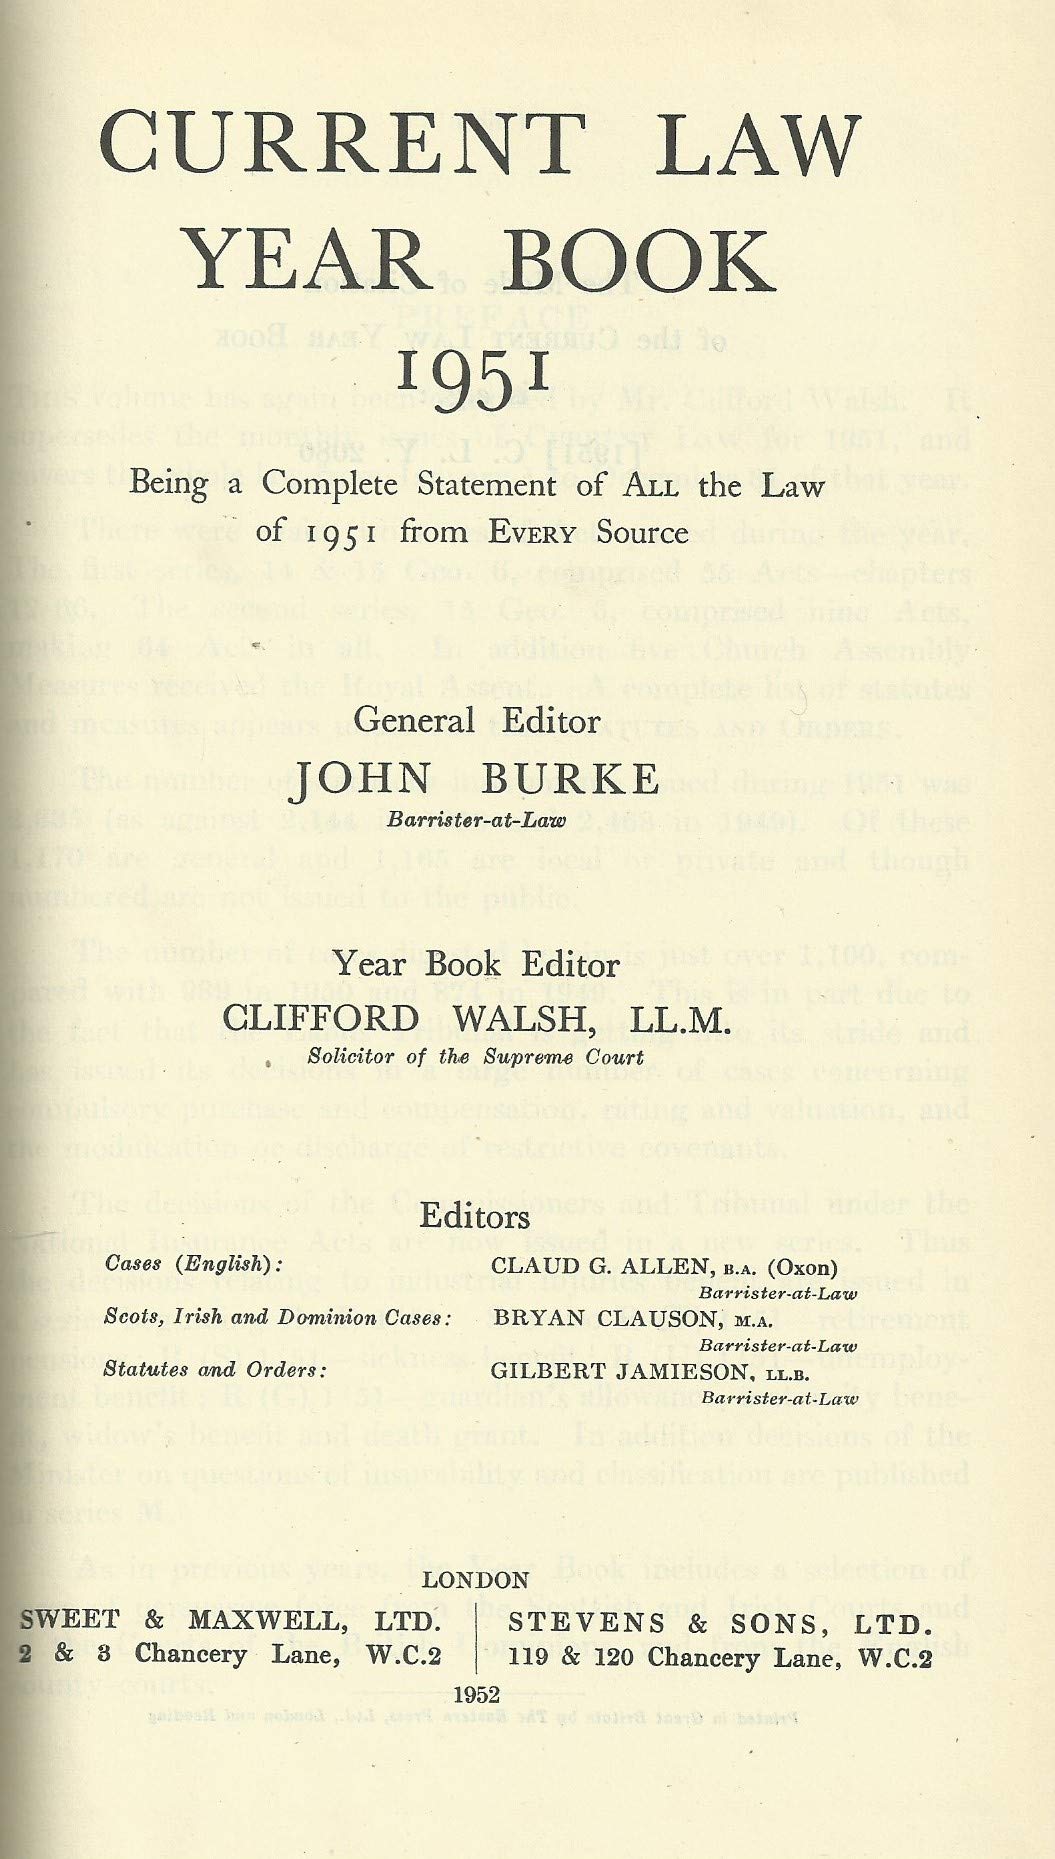 Current Law Year Book 1951. All the Law of 1951 from Every Source.